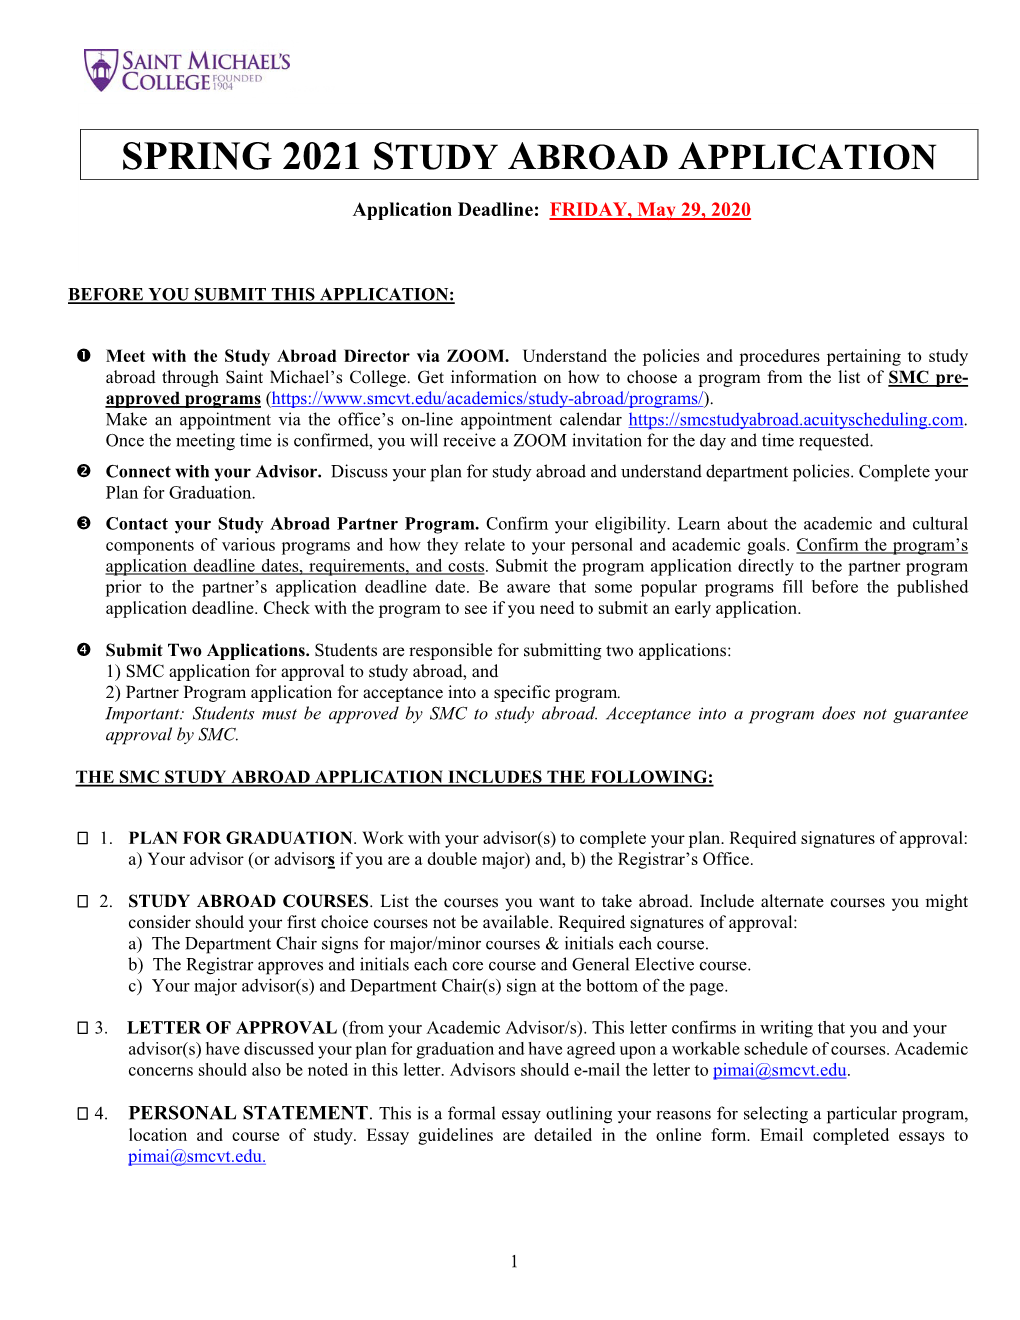 Spring 2021 Study Abroad Application